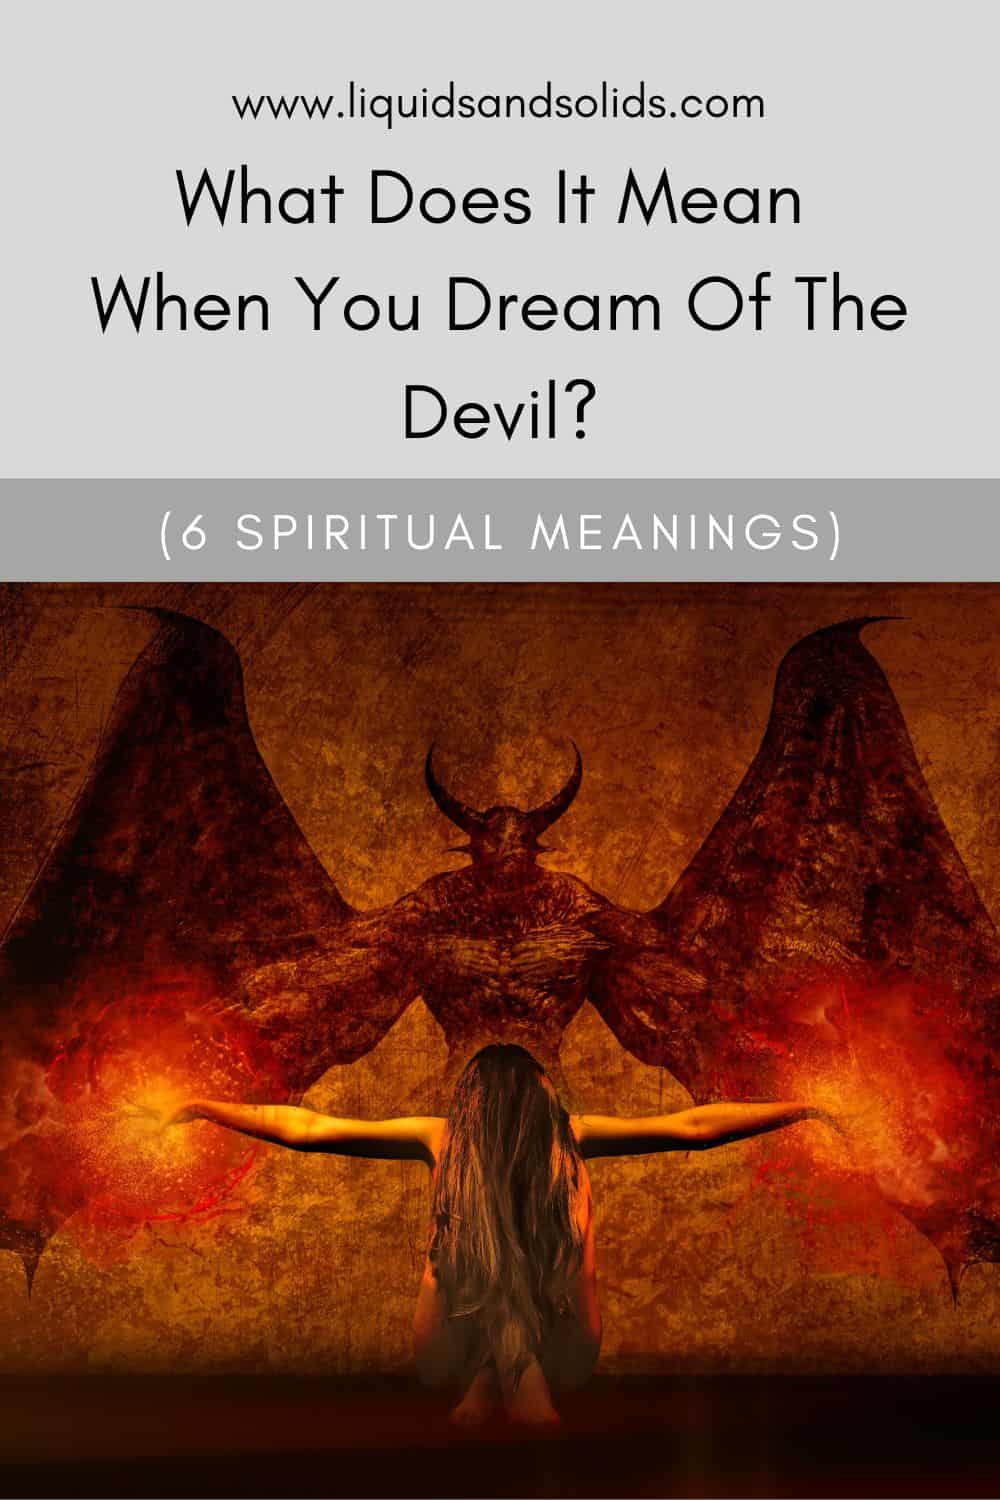 What Does It Mean When You Dream Of The Devil? (6 Spiritual Meanings)